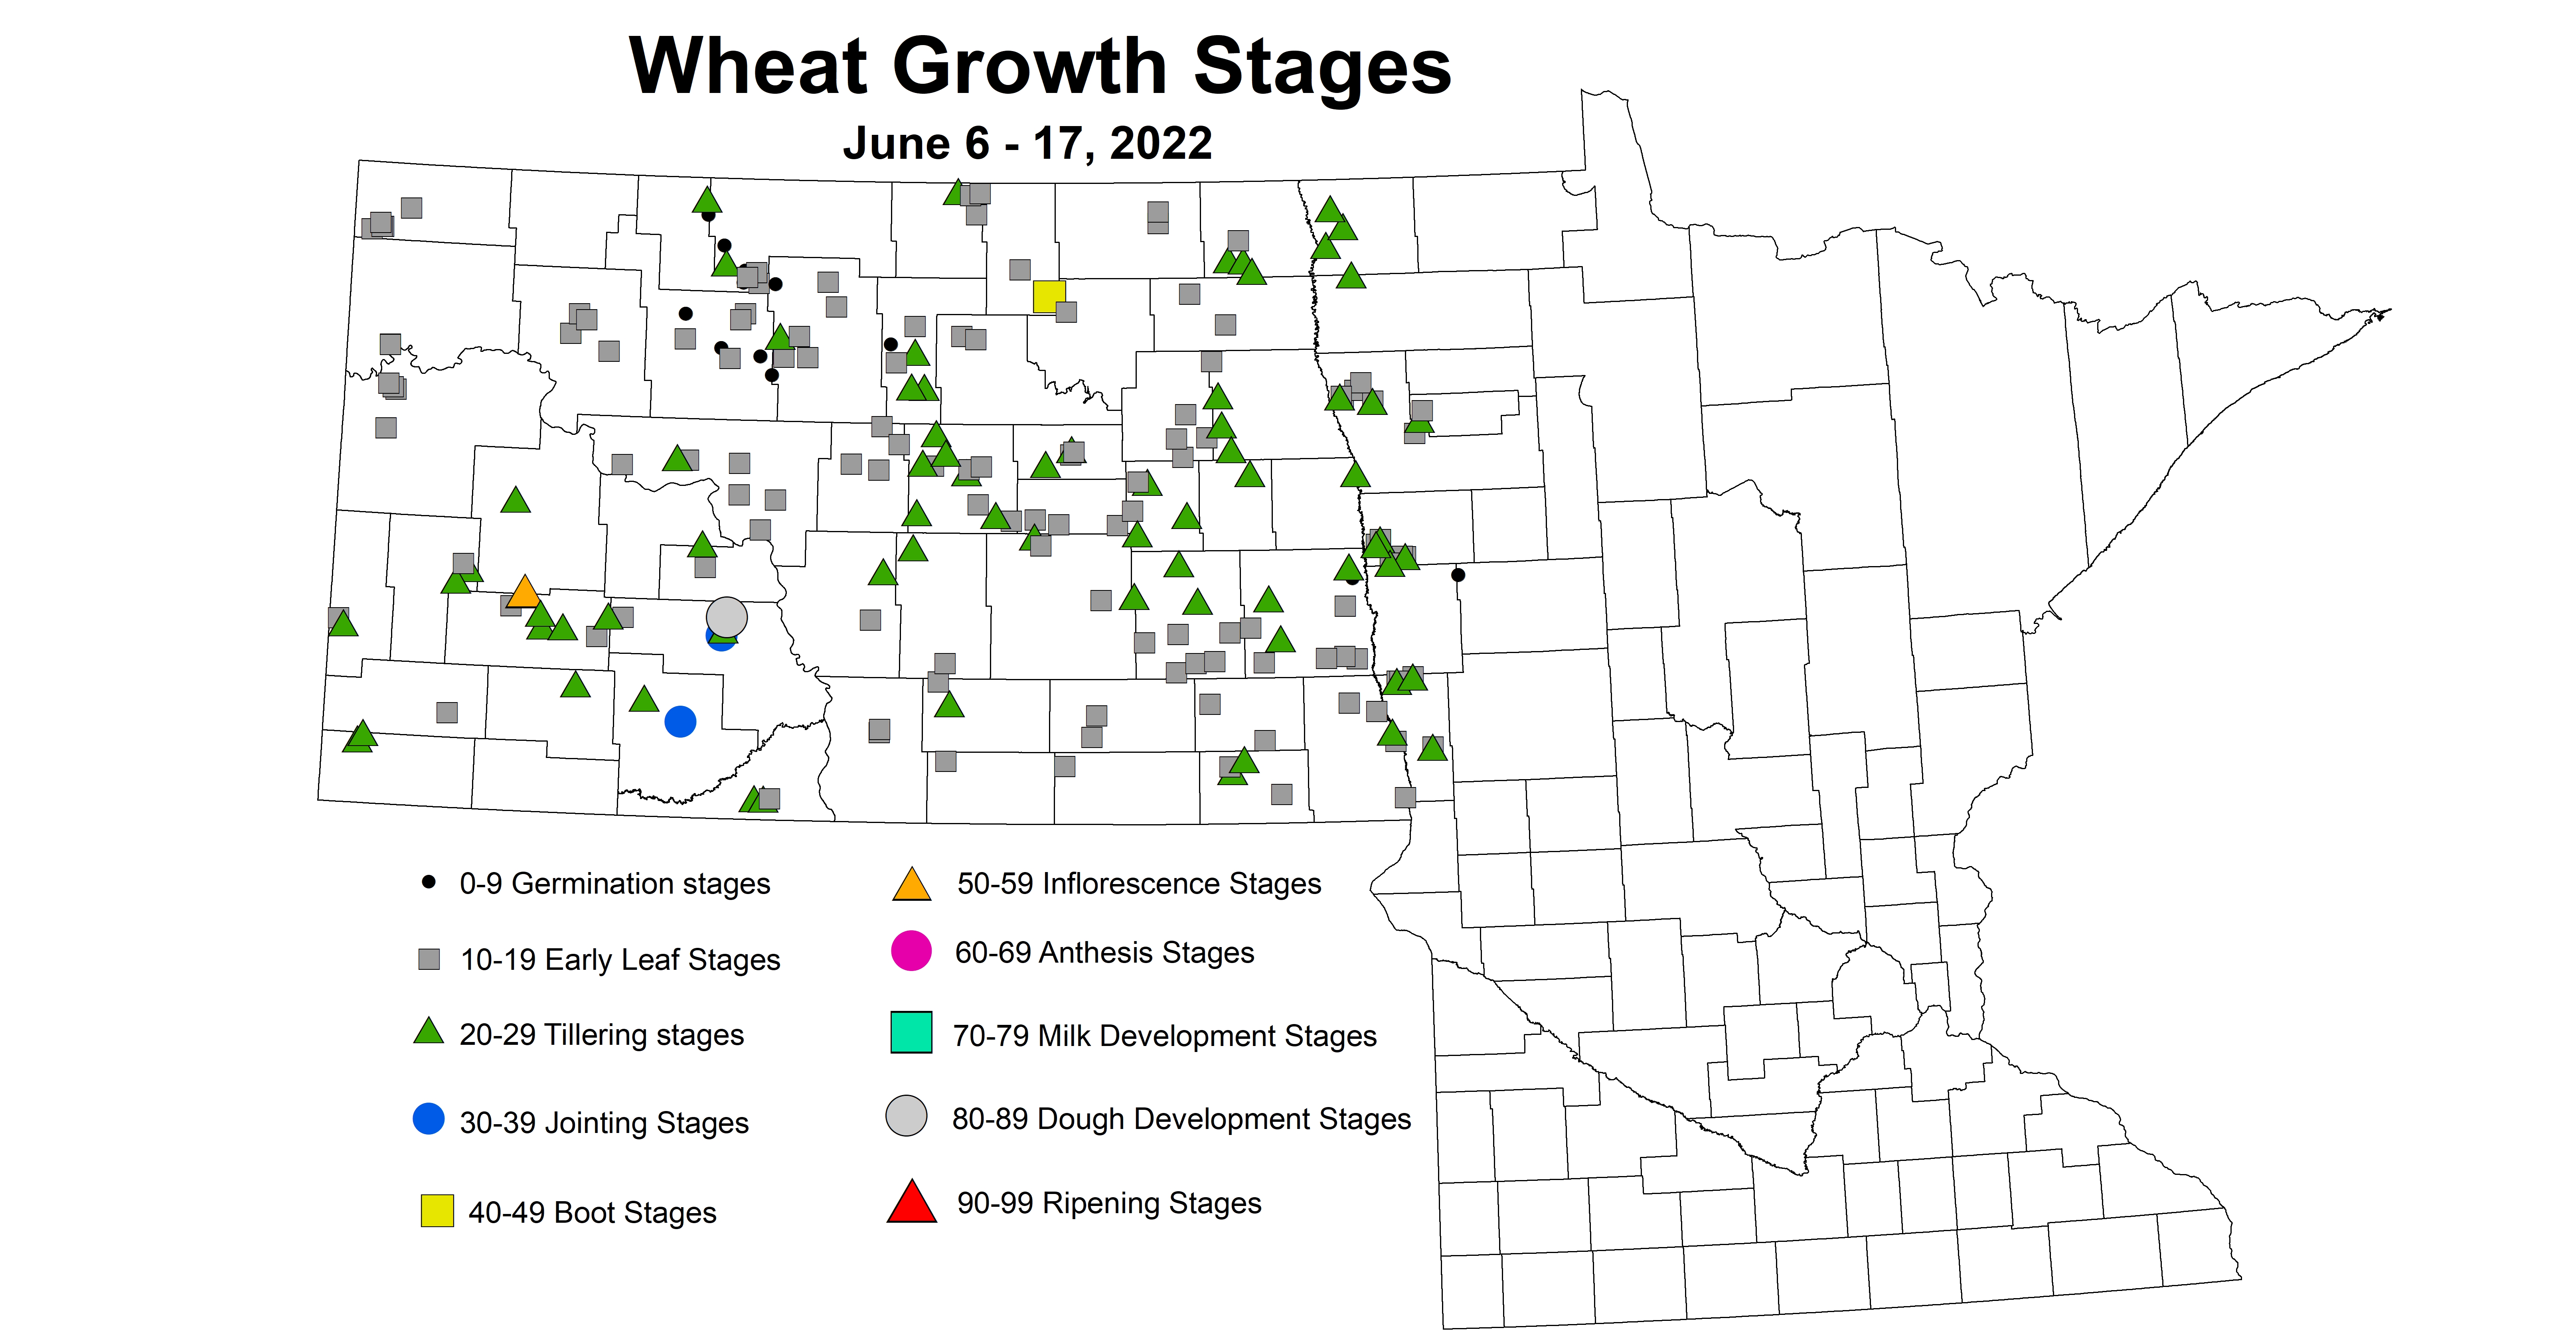 ND IPM map of wheat growth stages June 6-17, 2022